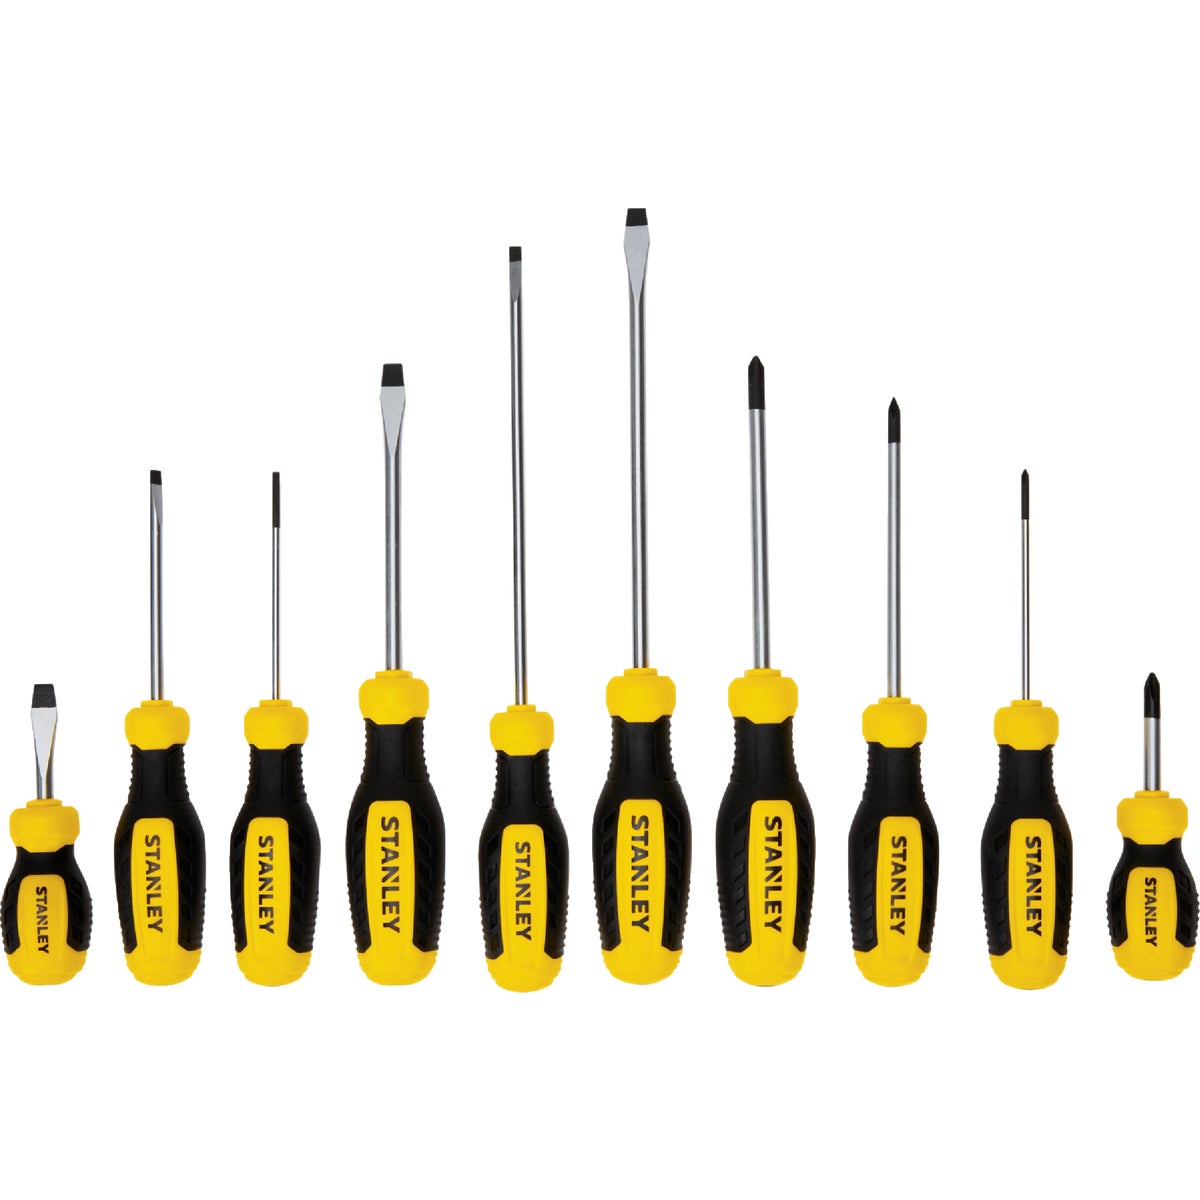 Item 375101, The Stanley 10-piece screwdriver set features popular tip sizes with black 